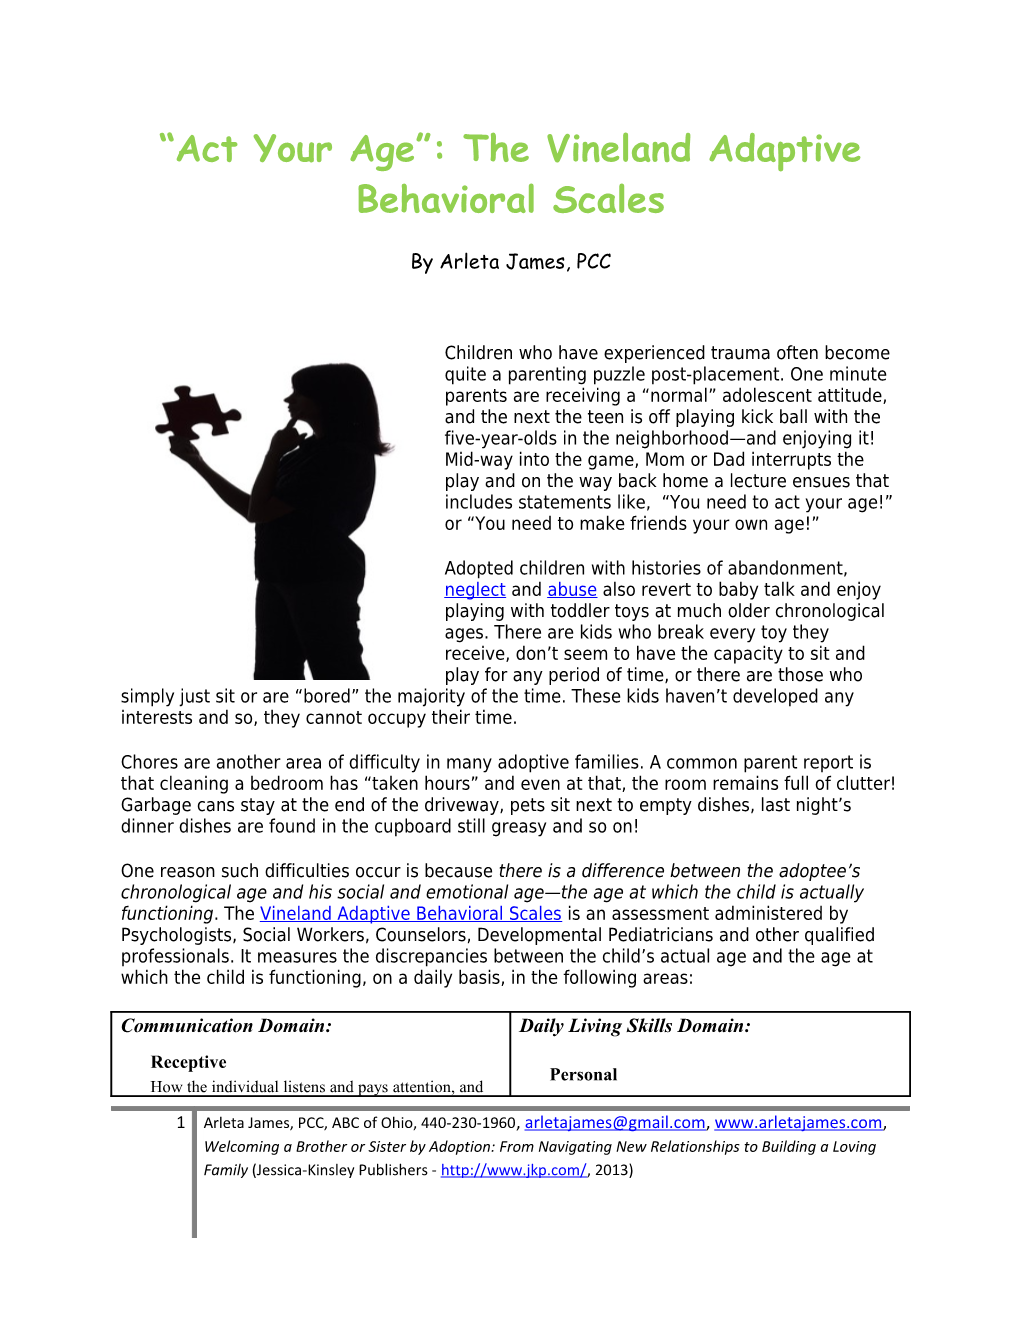 Act Your Age : the Vineland Adaptive Behavioral Scales